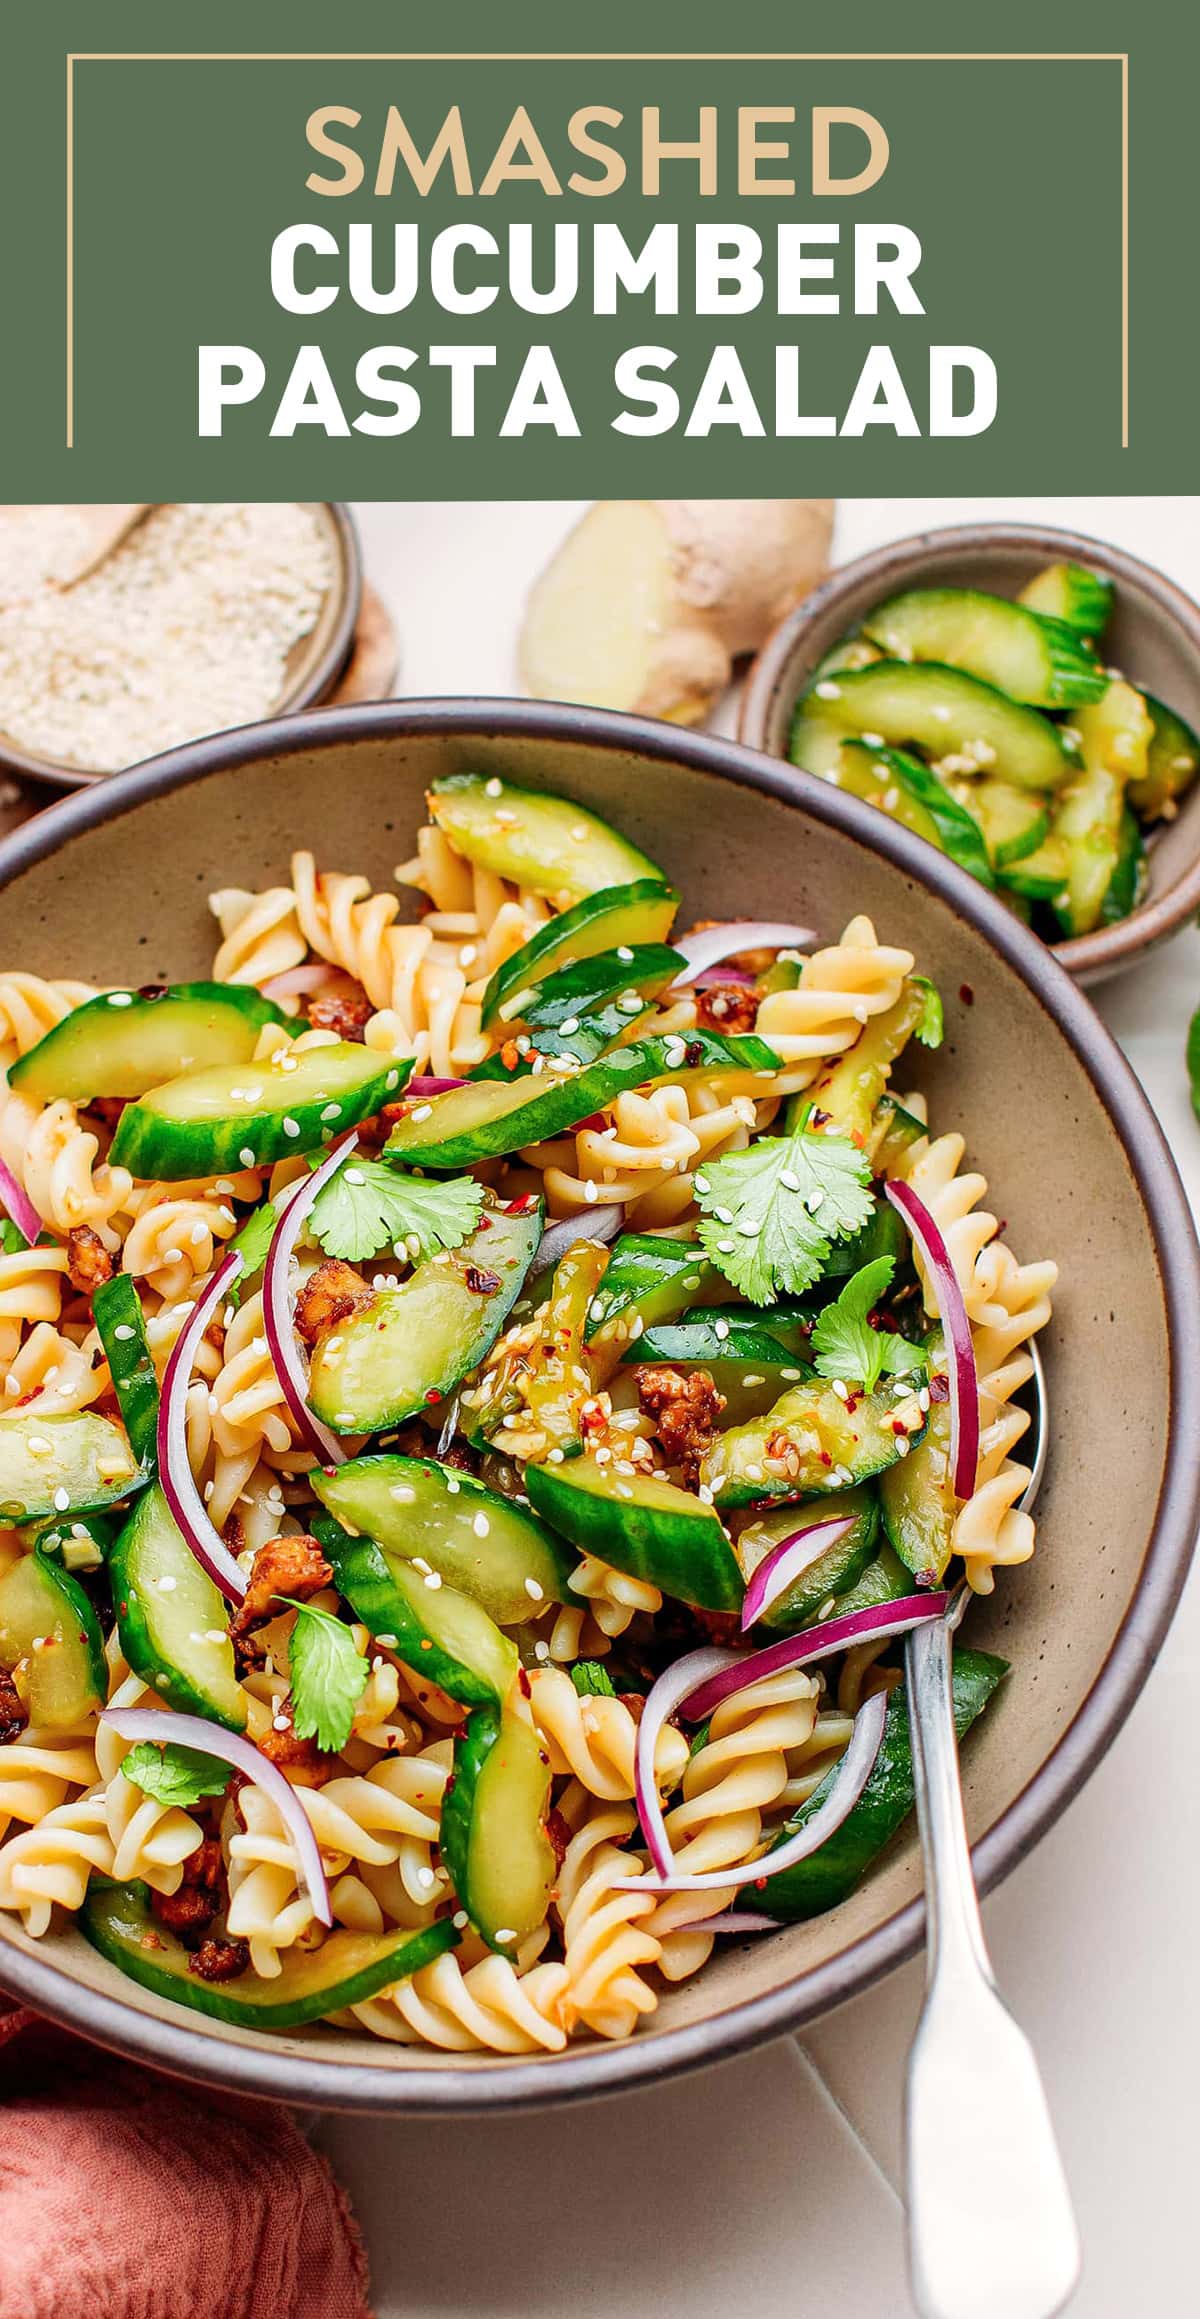 This smashed cucumber salad combines crispy cucumbers with tender fusilli pasta and meaty tofu crumbles. Seasoned with soy sauce, toasted sesame oil, and rice vinegar, this salad is refreshing, packed with texture, and superbly seasoned! #smashedcucumbers #vegansalad